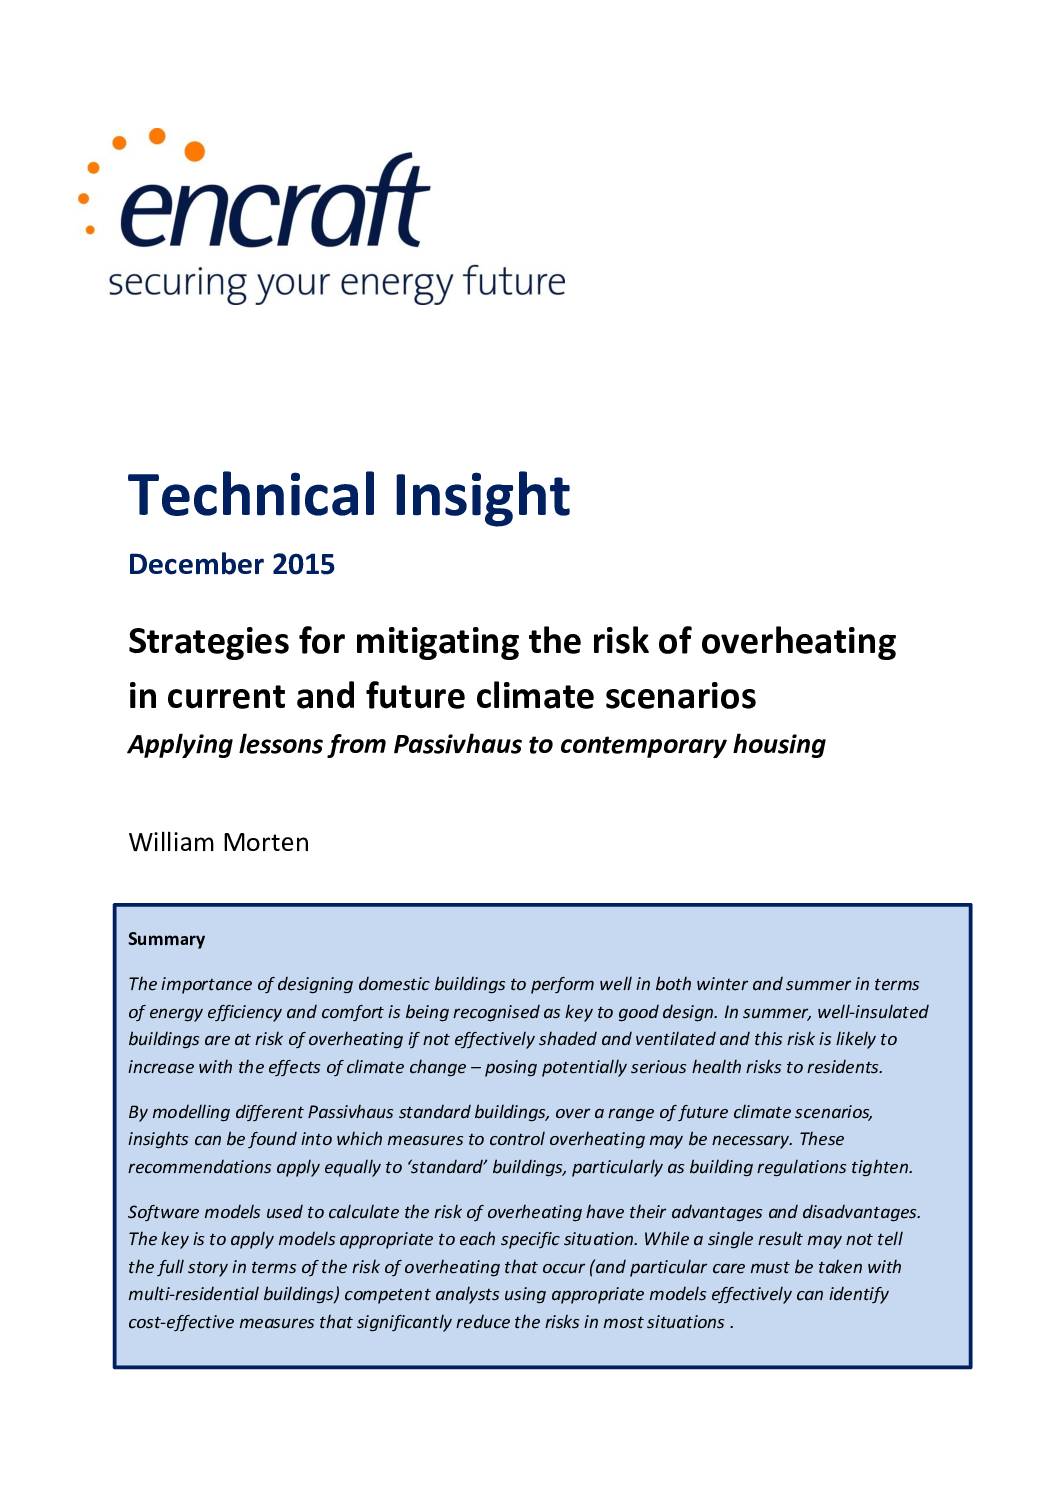 Strategies for mitigating the risk of overheating in current and future climate scenarios